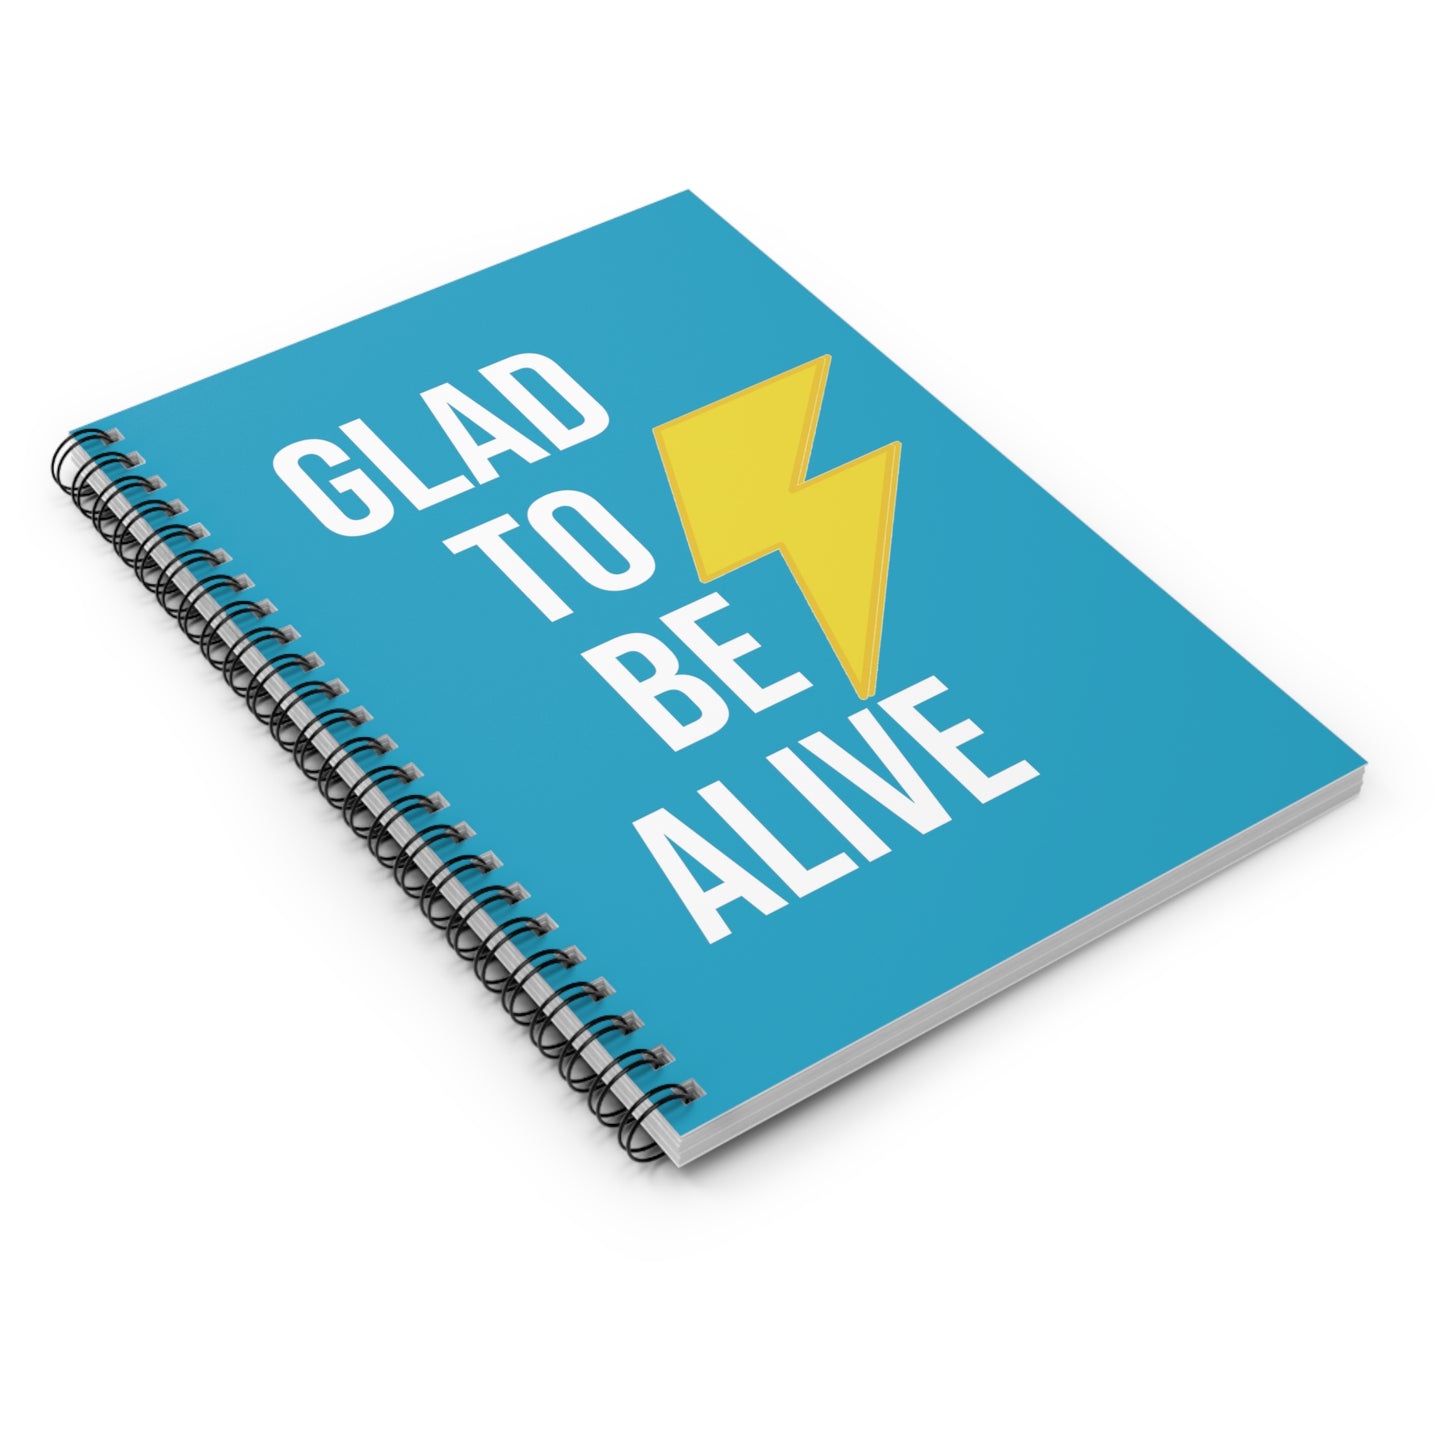 Glad To Be Alive Spiral Notebook - Ruled Line